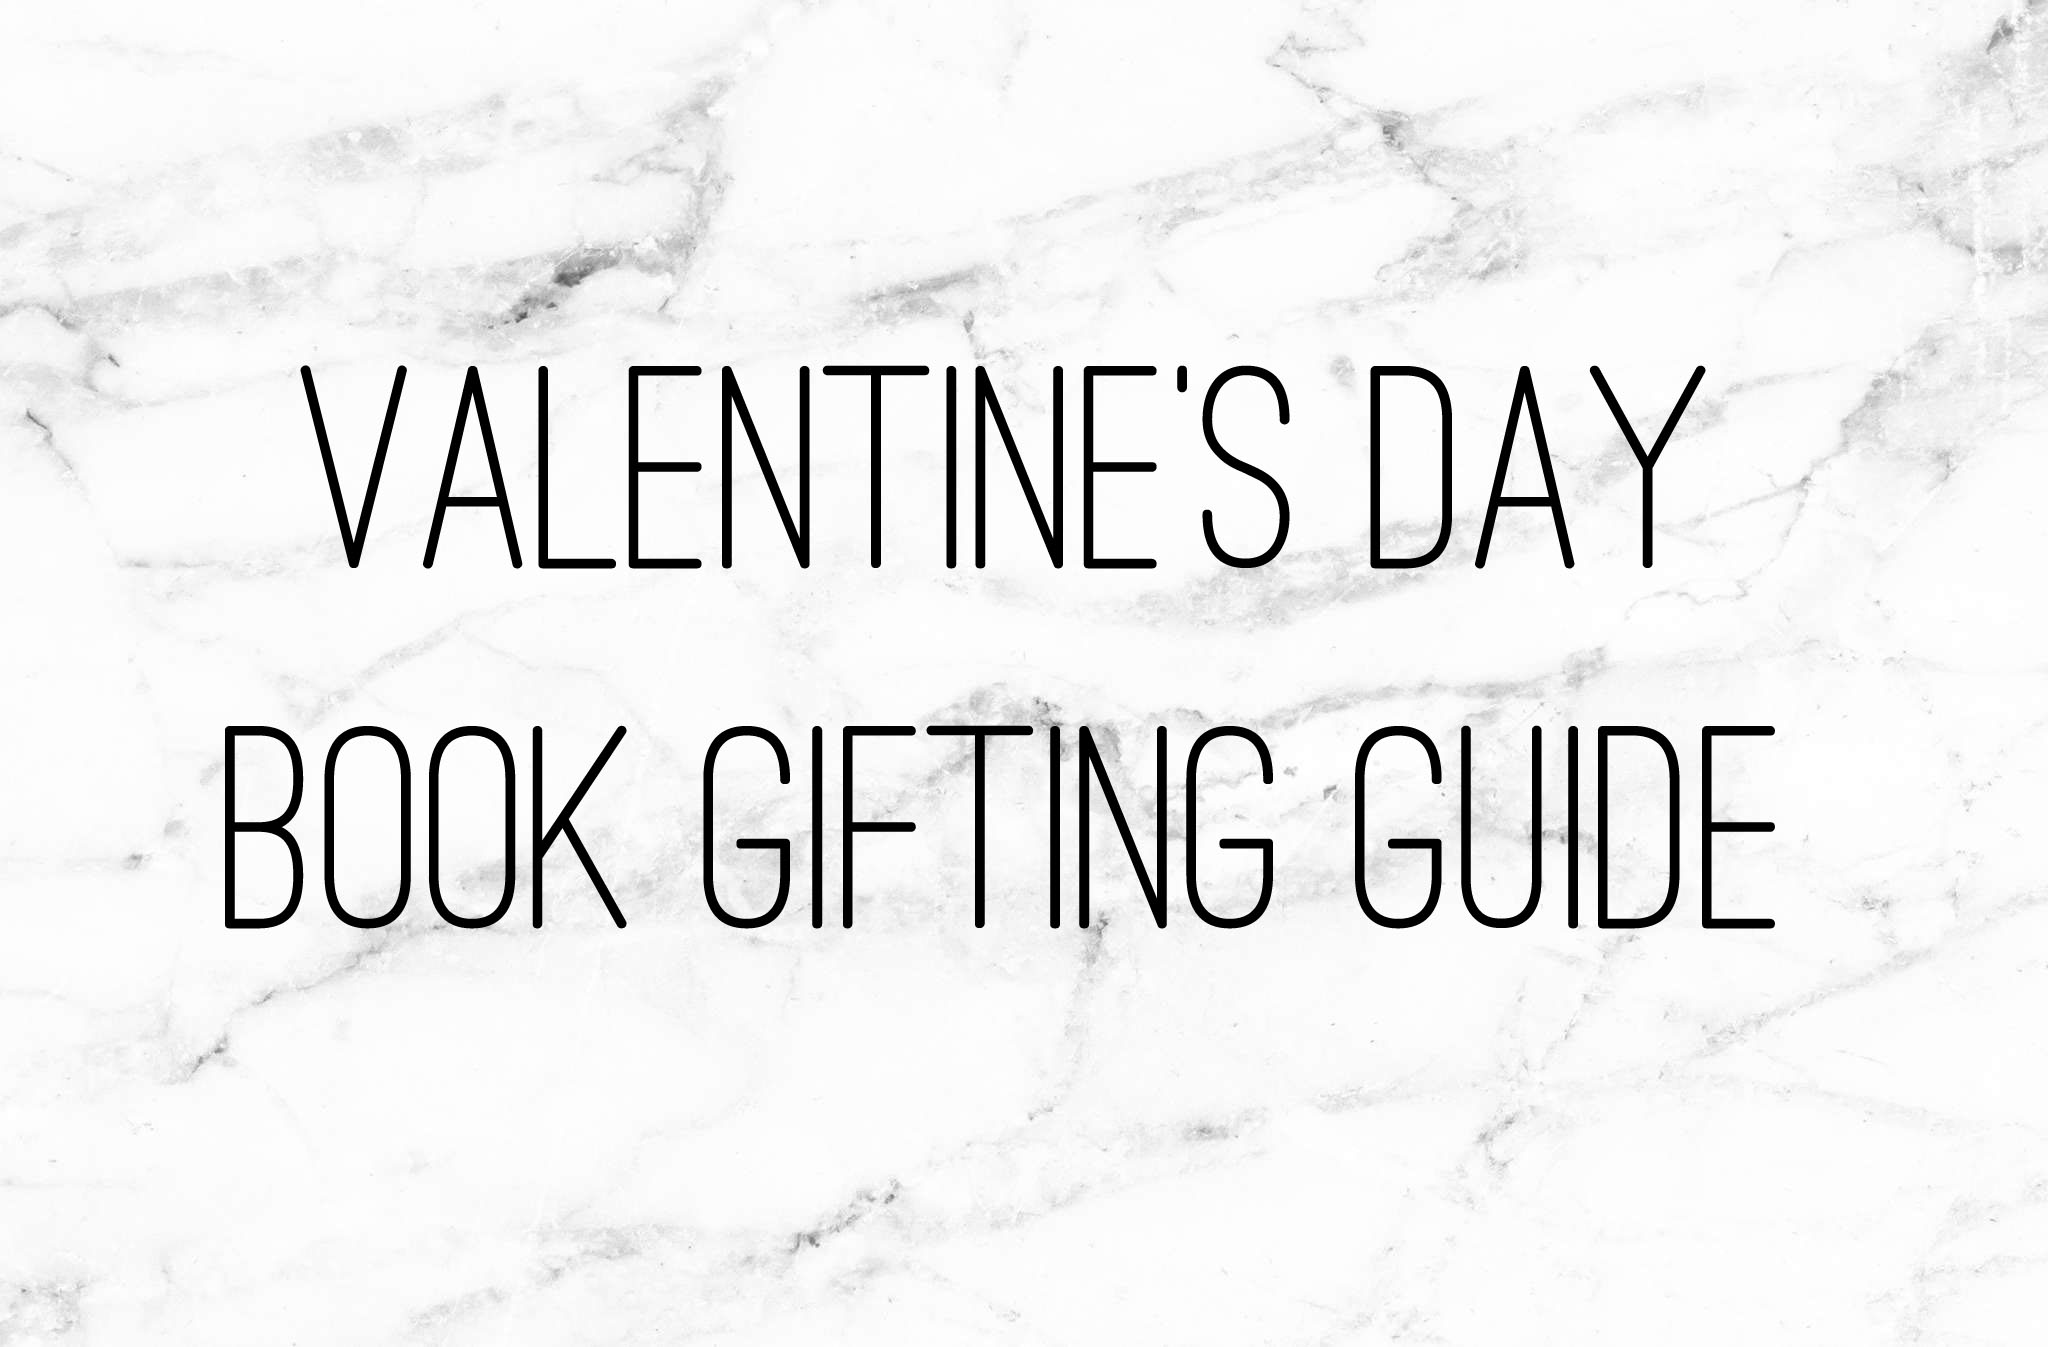 Valentine’s Day Book Gifting Guide